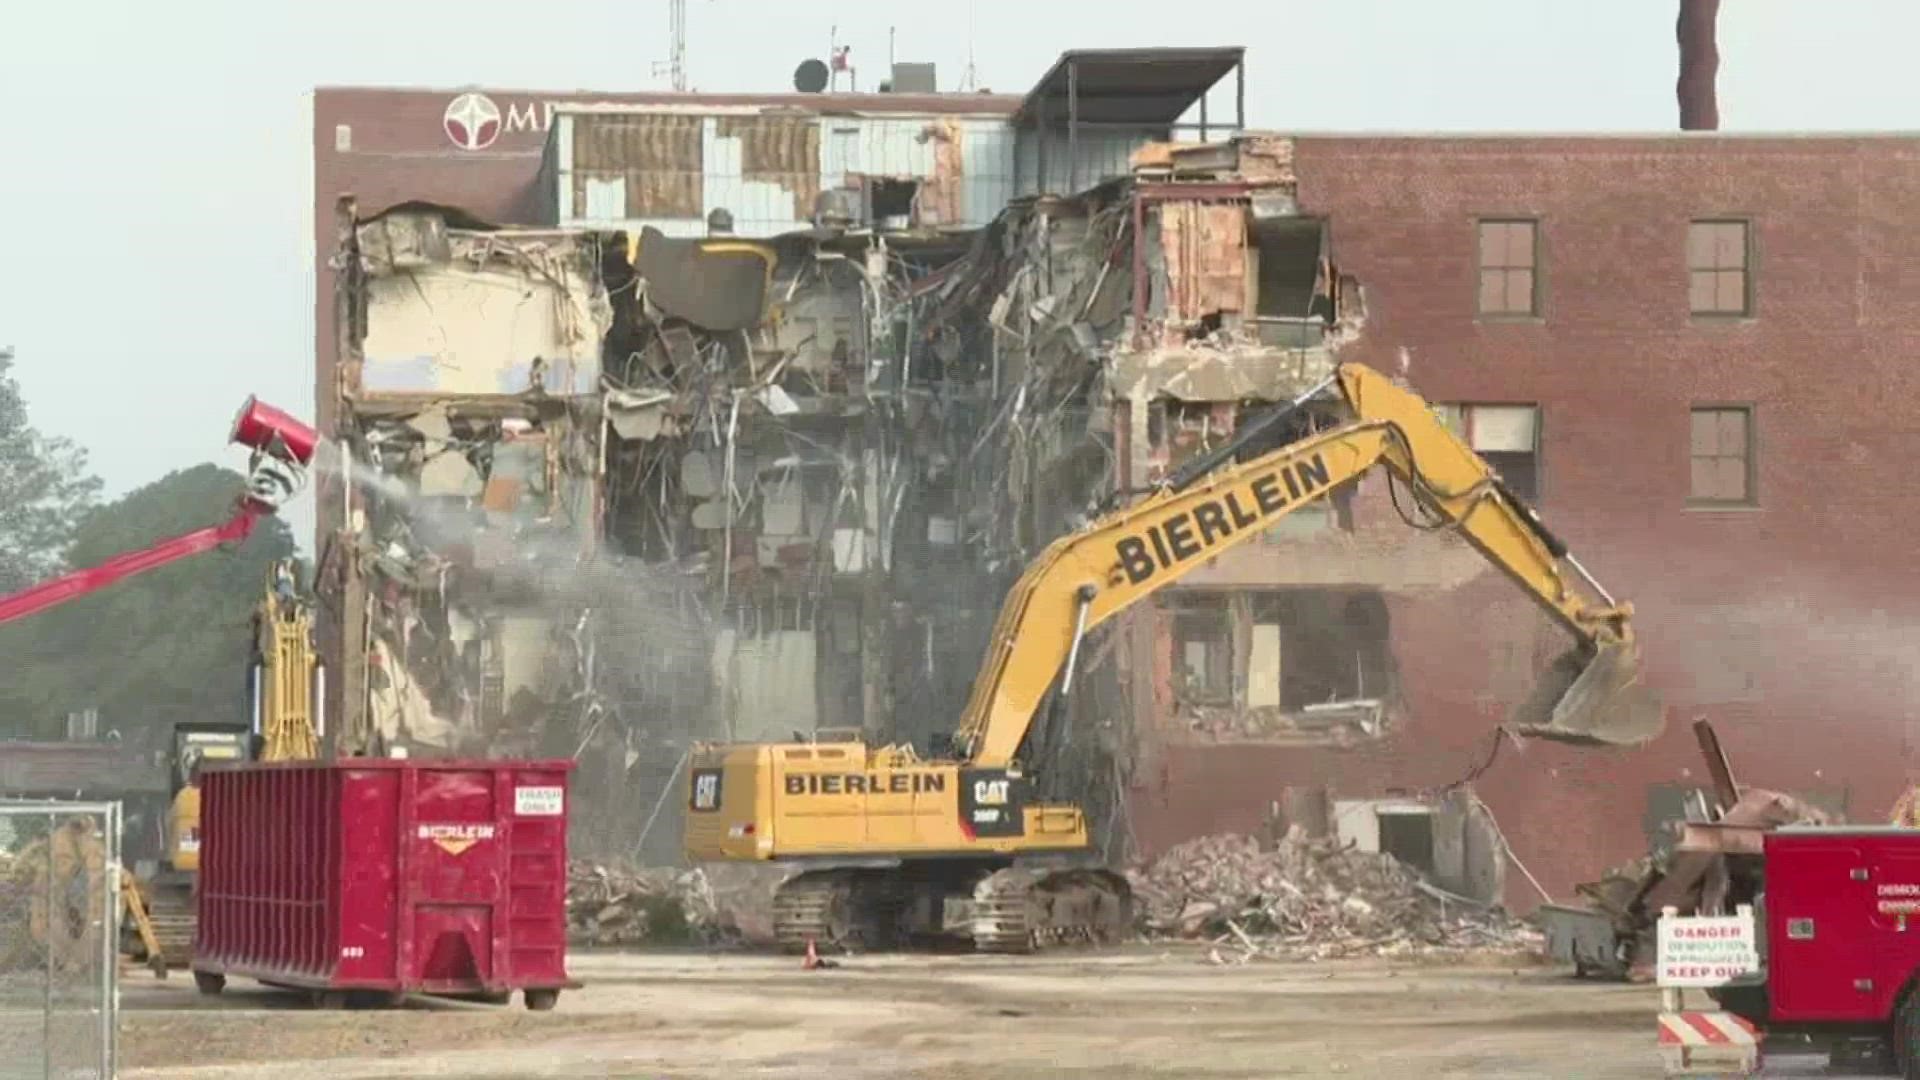 The hospital, which opened its doors in 1904, is being torn down to make way for a new middle school in the Muskegon school district.